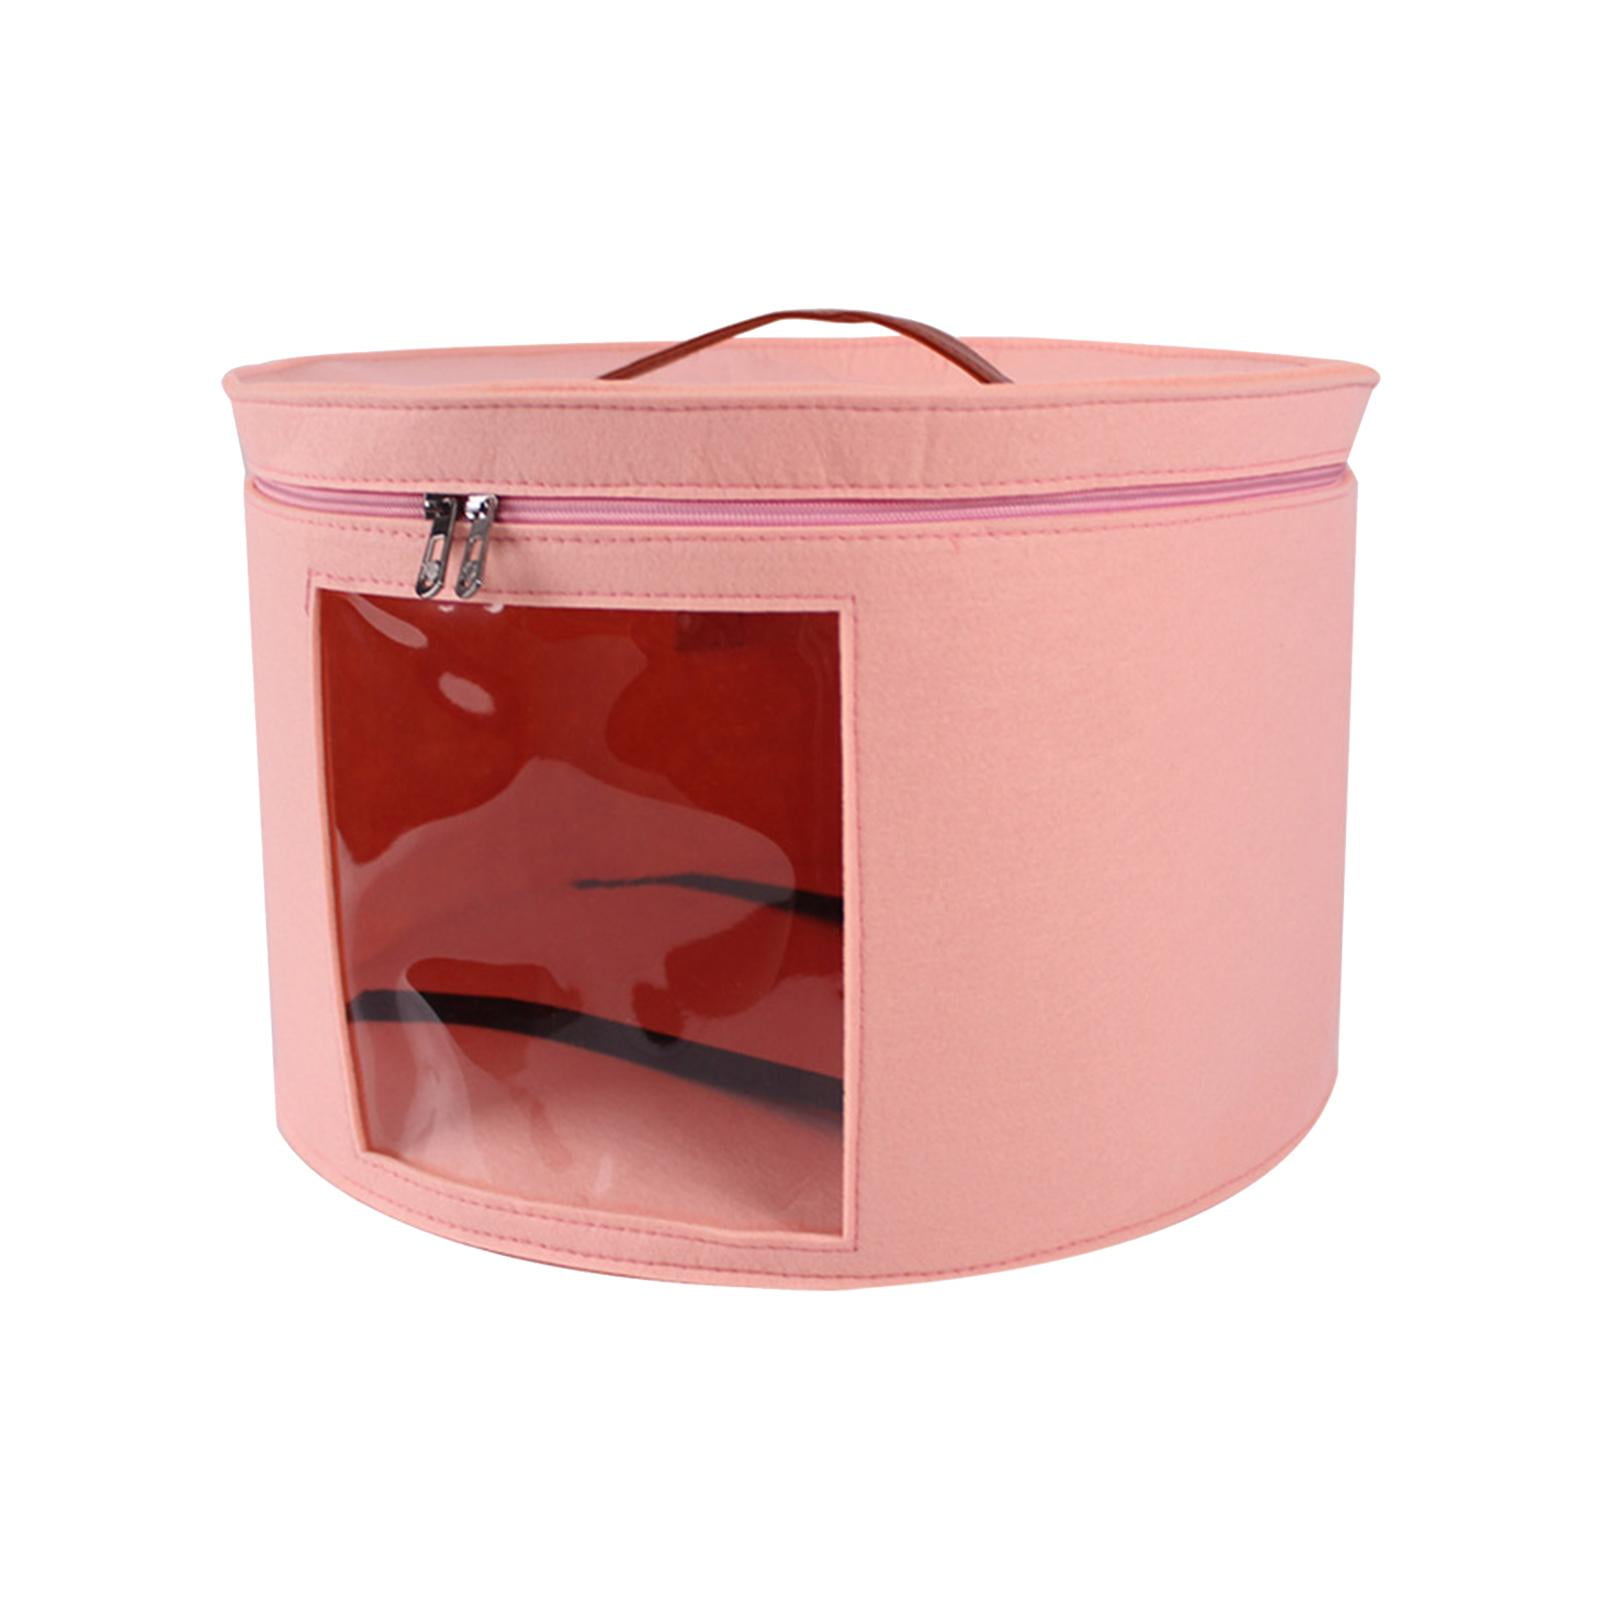 Extra Large 18” Hat Box in Pink Scroll Floral on Cream, Decorative Covered Hat  Boxes, Round Storage Box, Keepsake Boxes with Lid, Nesting